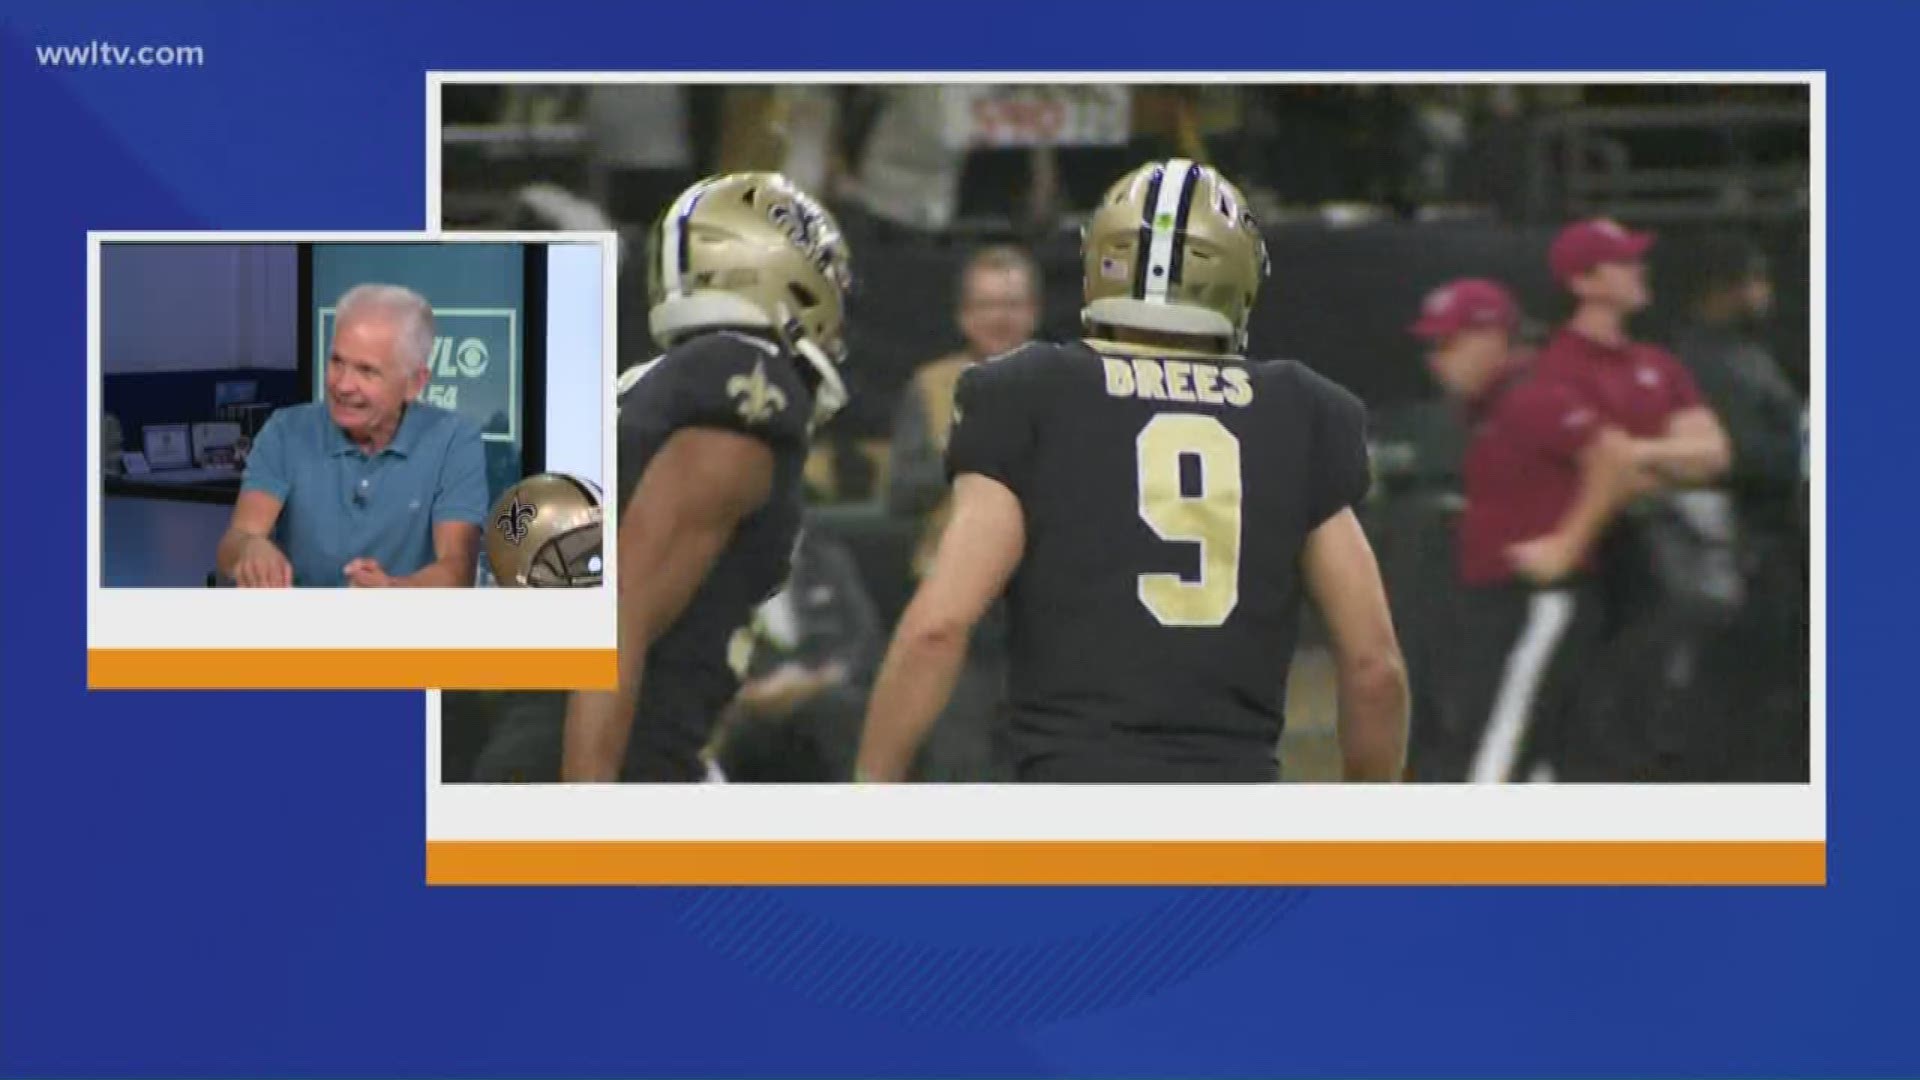 Fitness Expert Mackie Shilstone sits down with Eric to discuss the return Legendary Quarterback Drew Brees and his peak performances through the years.